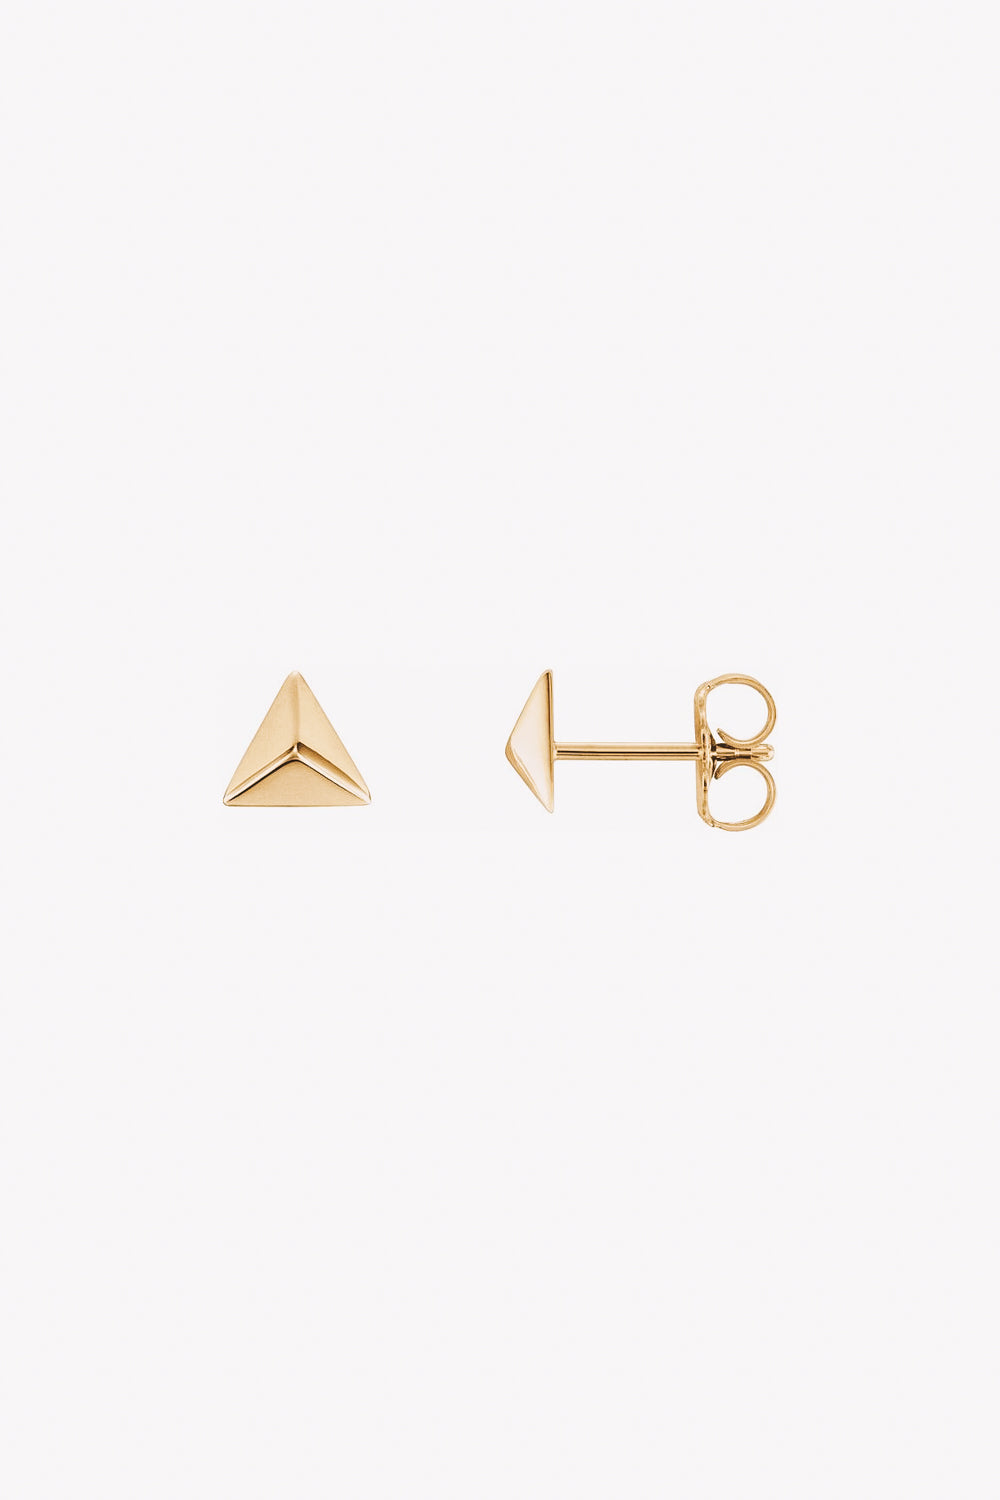 14k gold triangle pyramid stud earrings side view